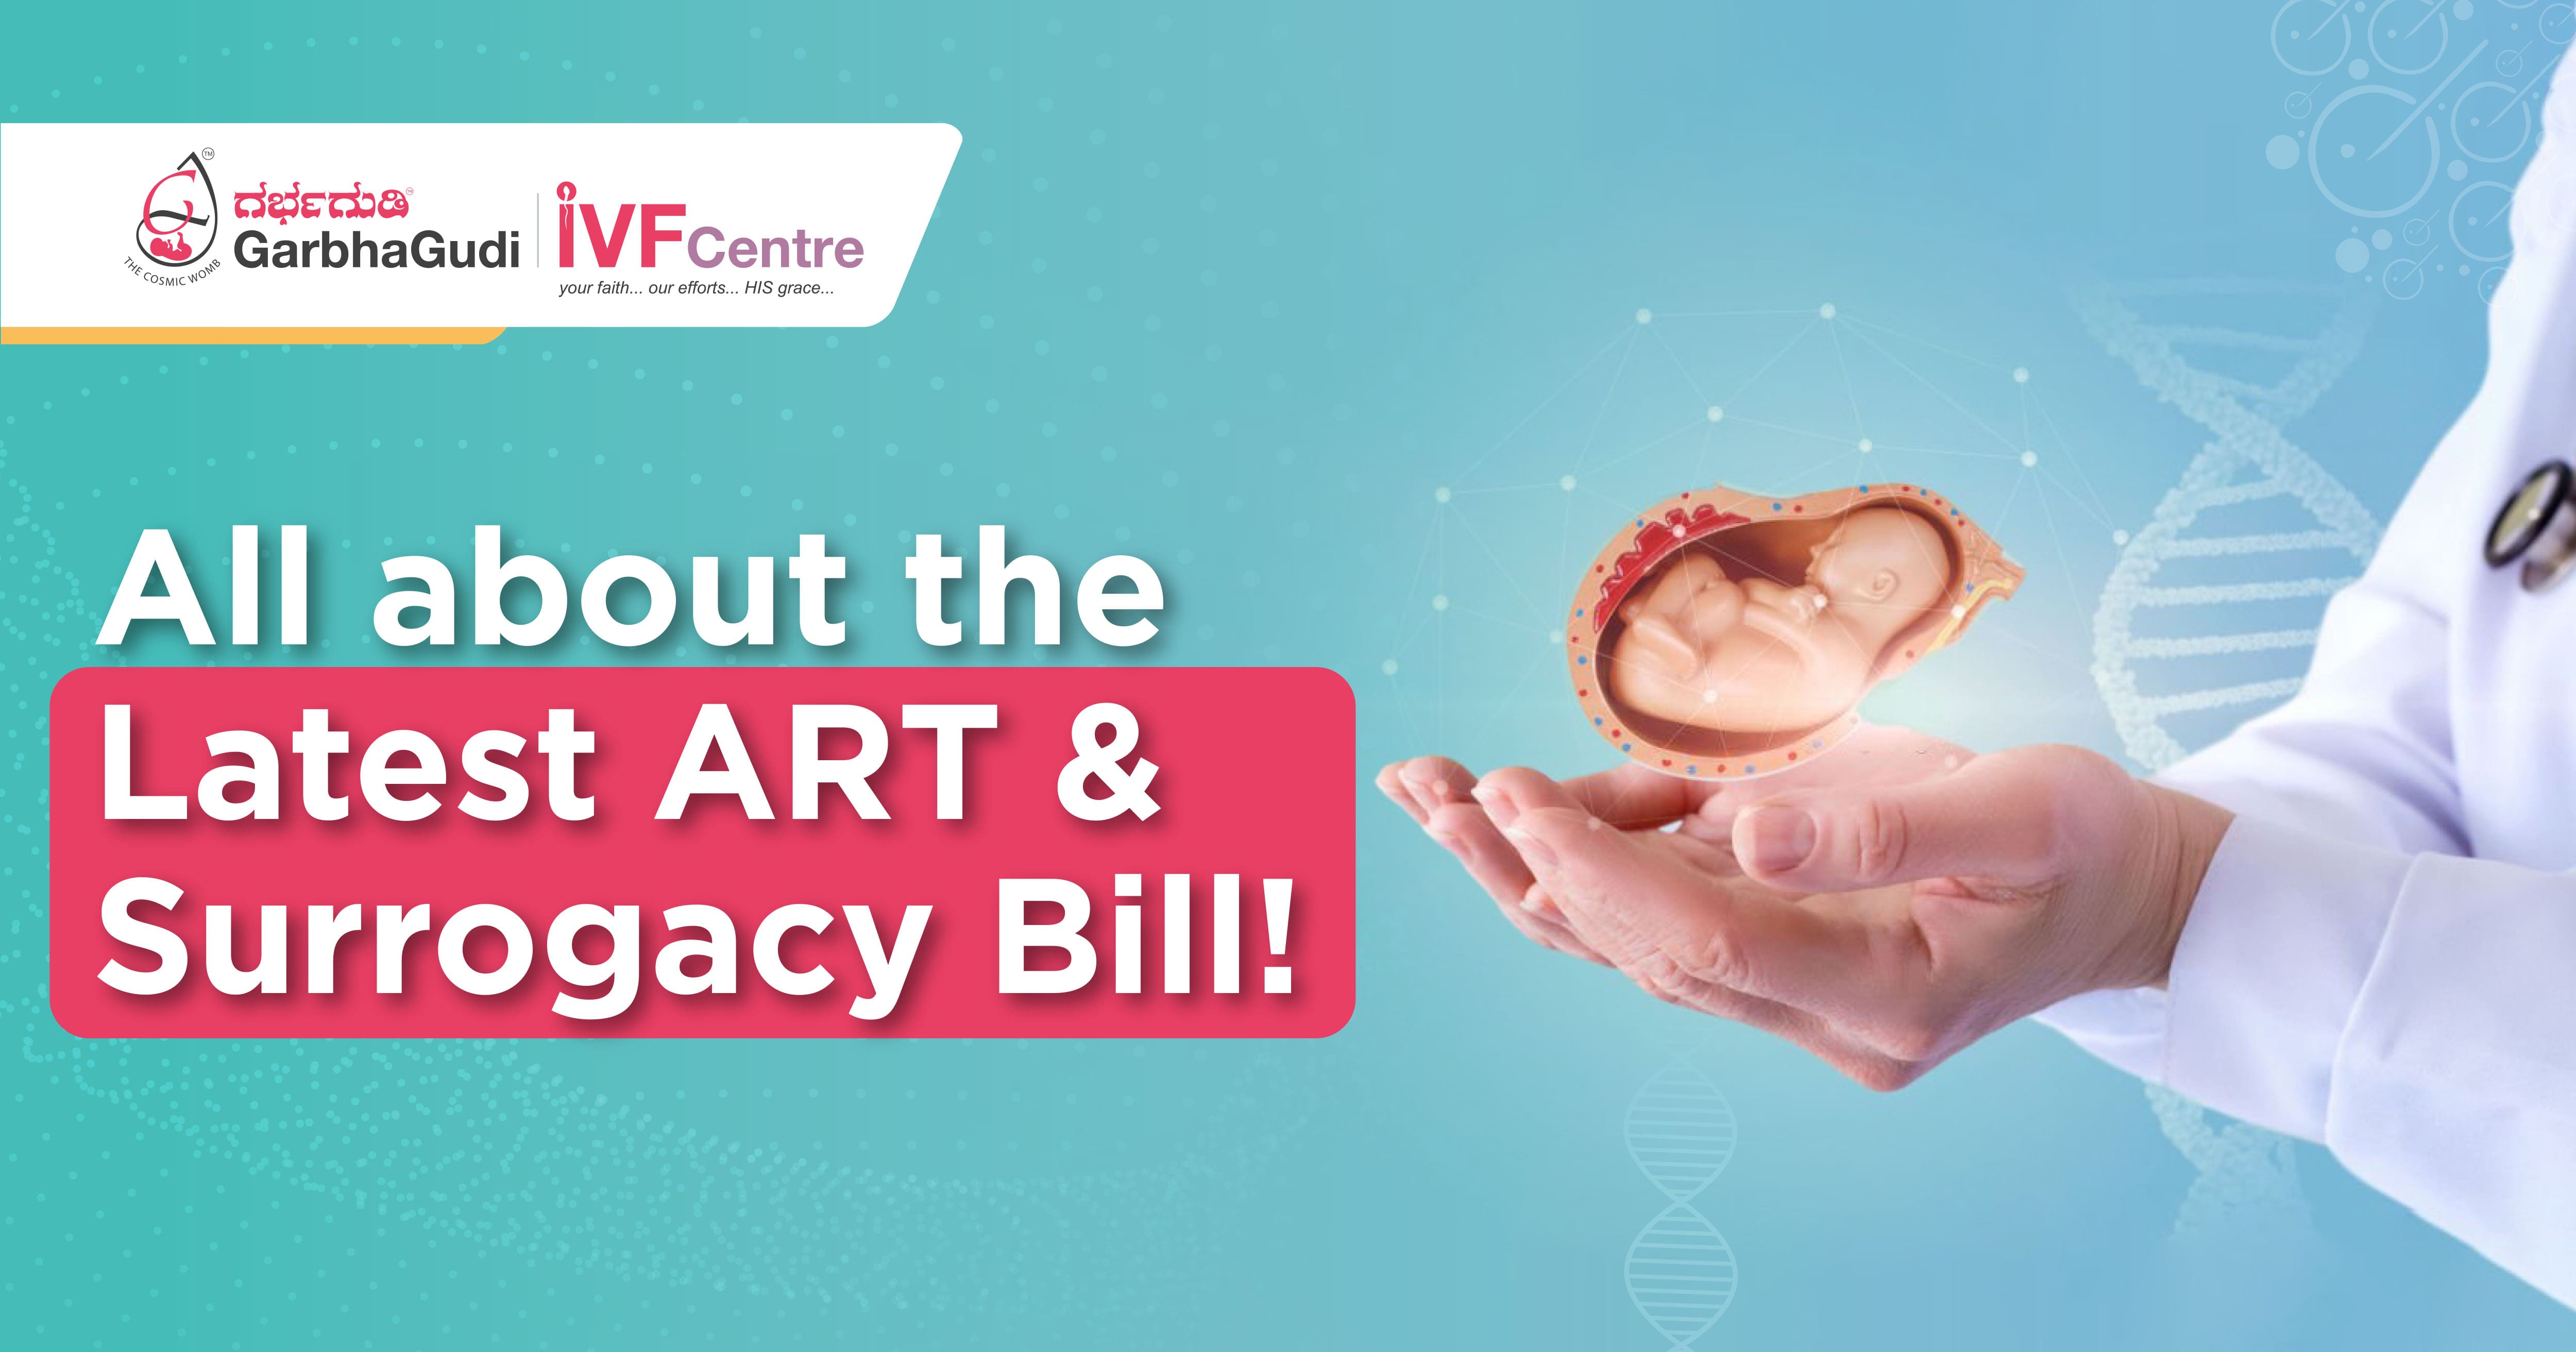 All about the latest ART & Surrogacy Bill!